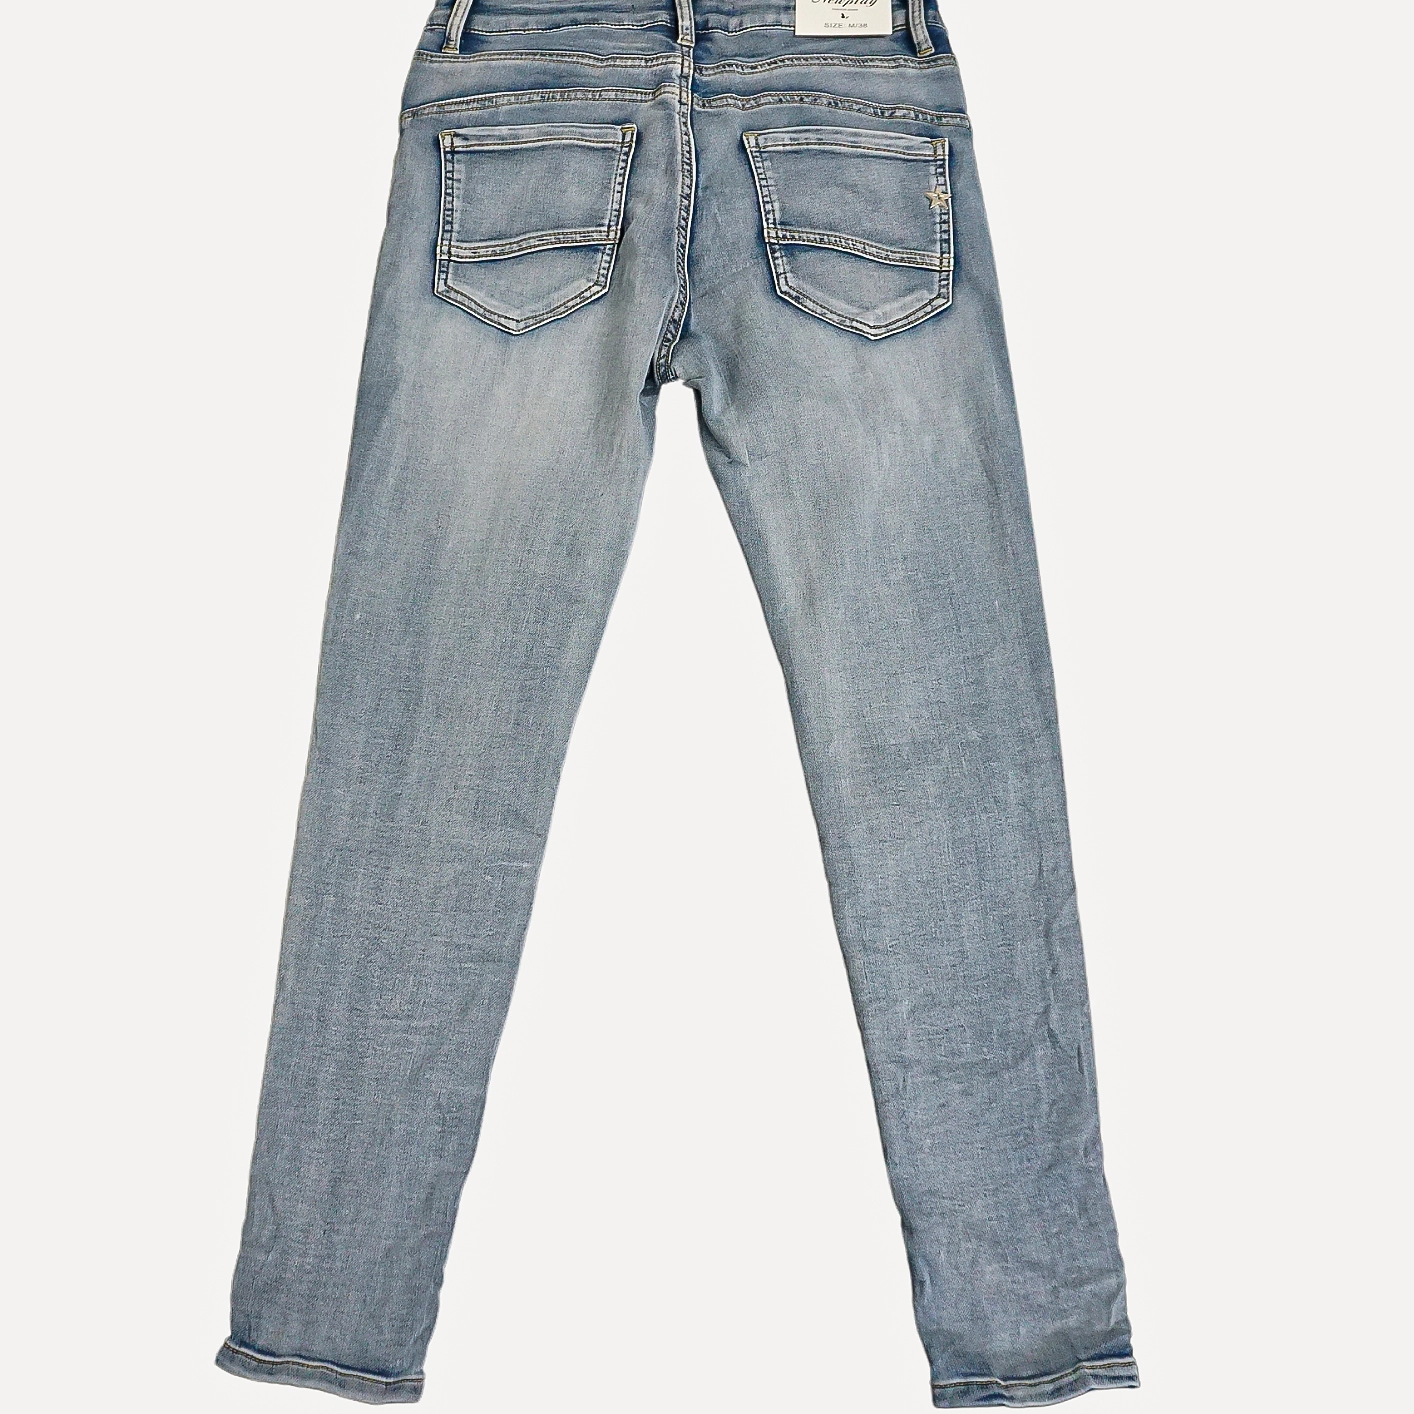 Reunion Jeans Washed Blue